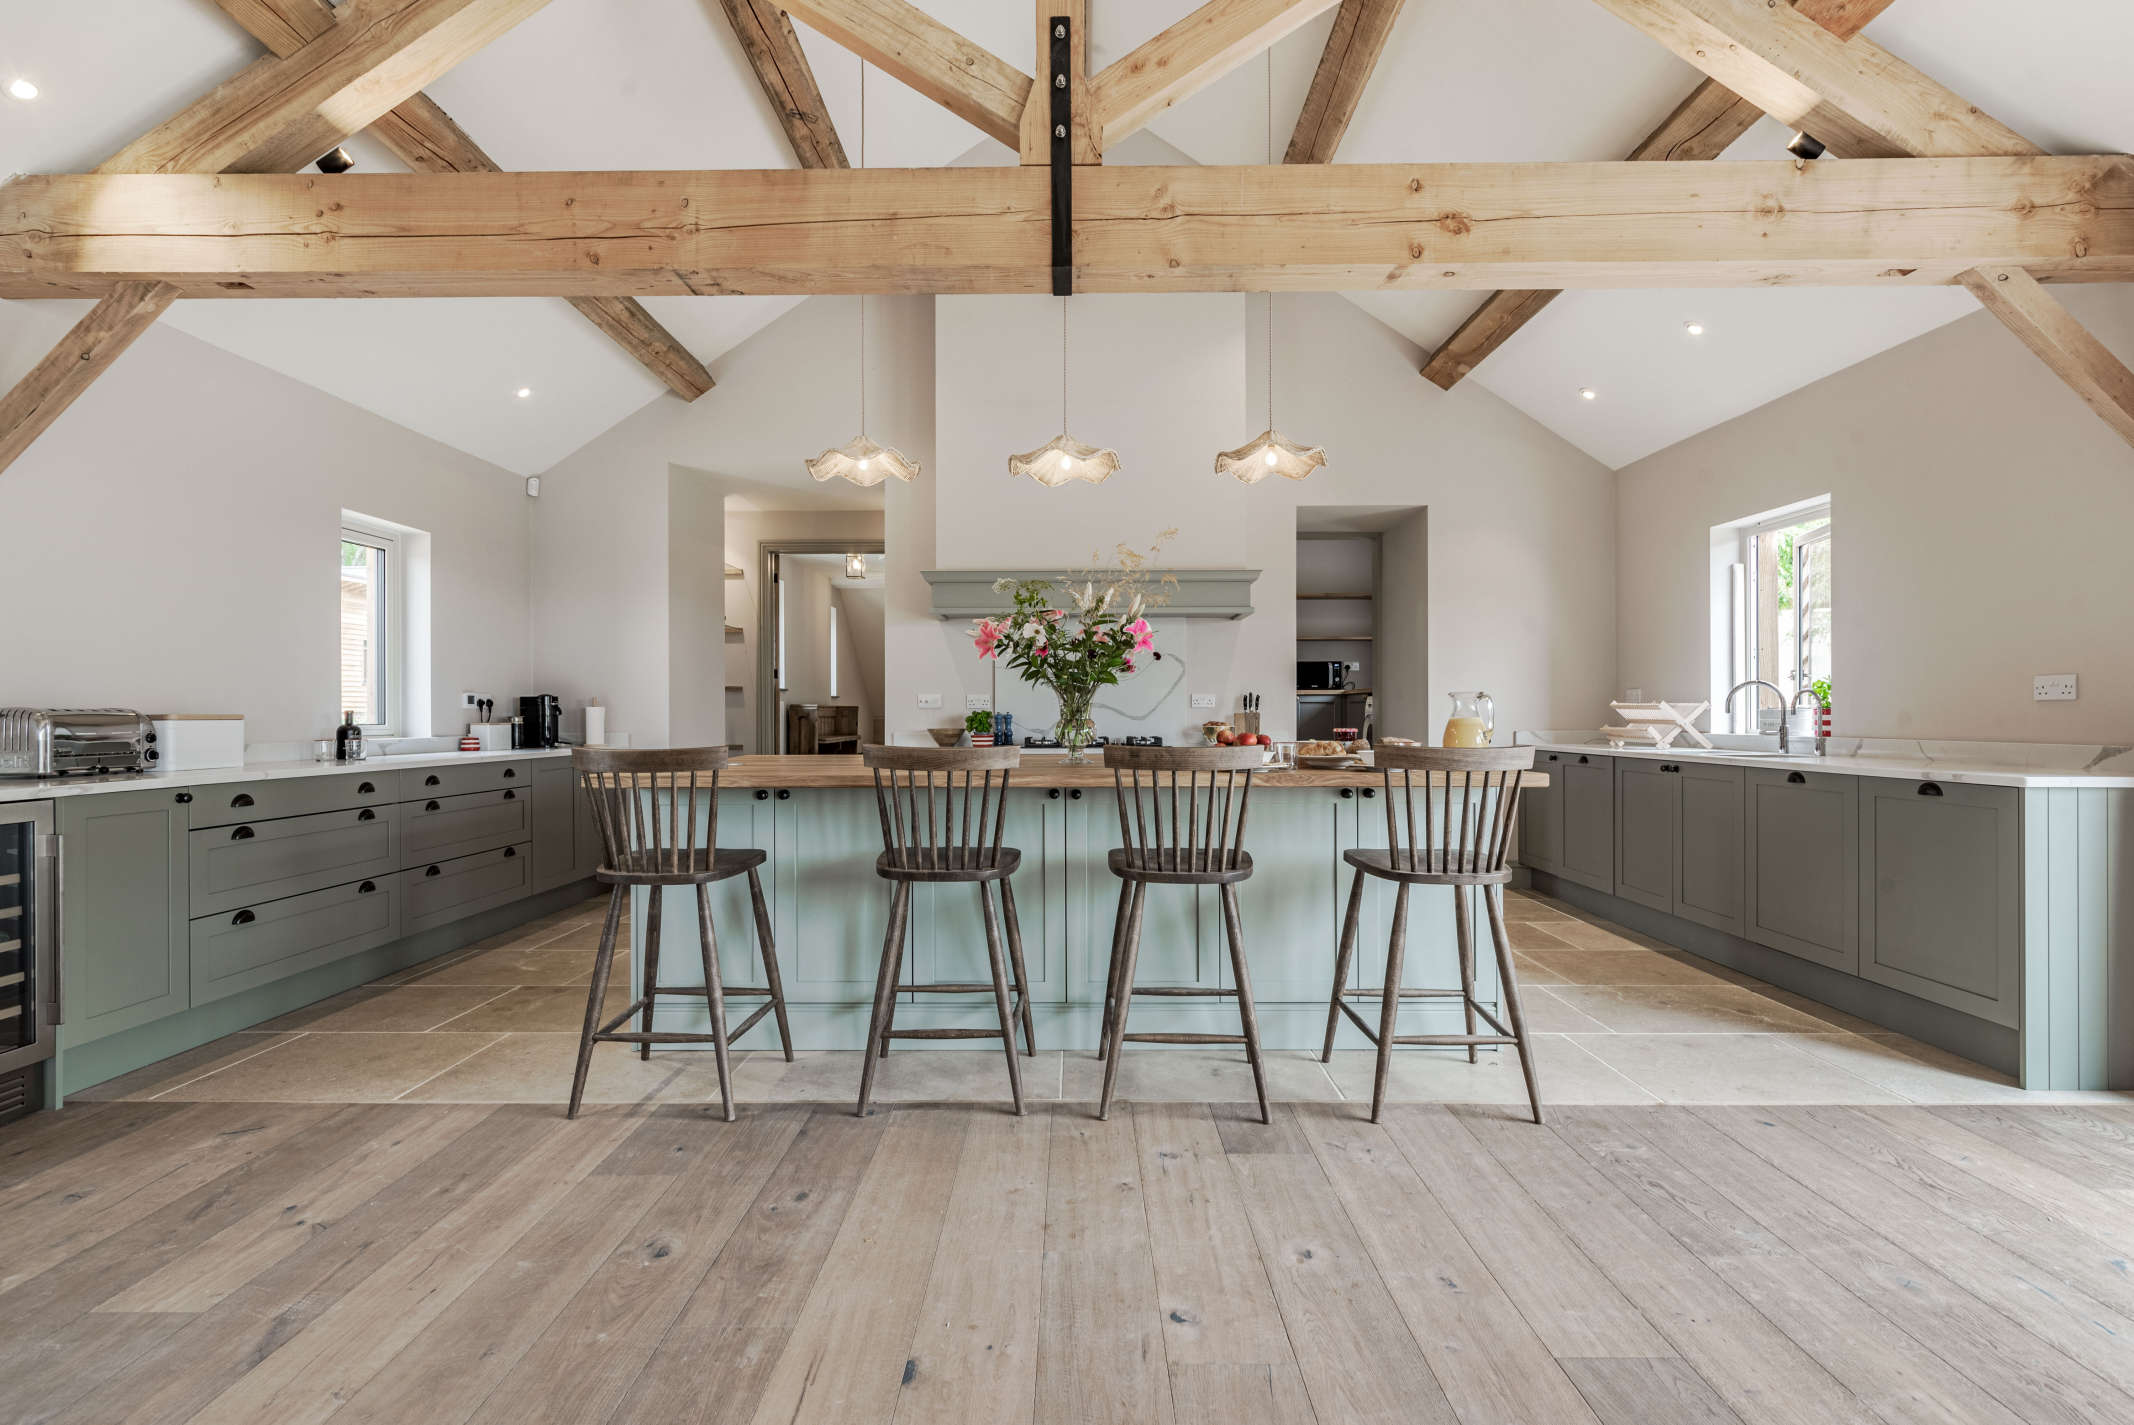 The Oat Barn in Faringdon has its own hot tub and exposed timber beams